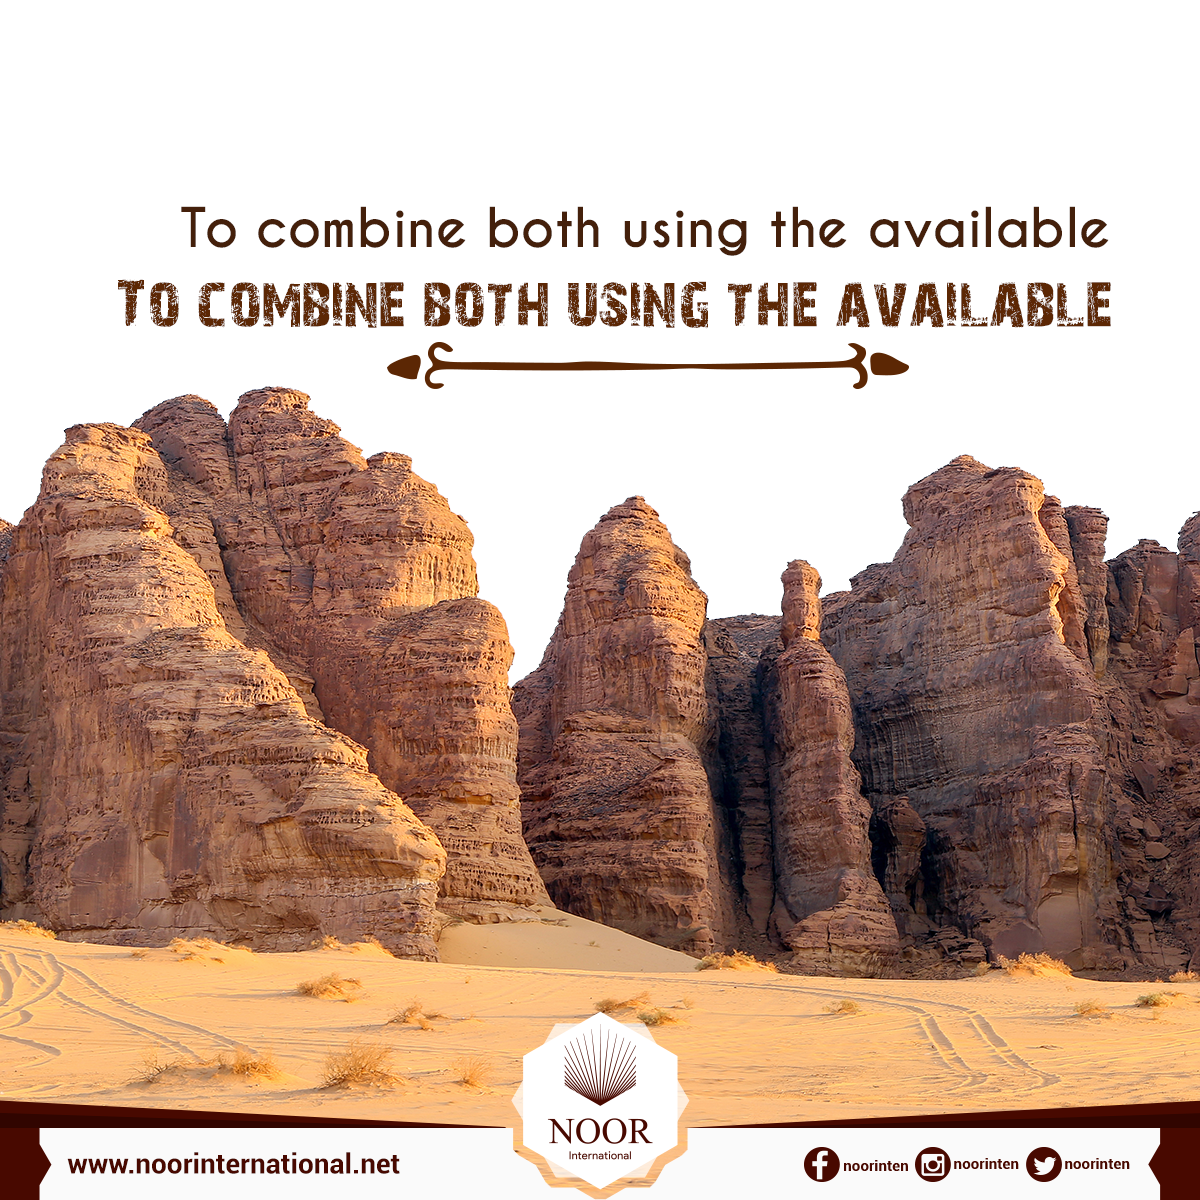 To combine both using the available means with relying on Allah